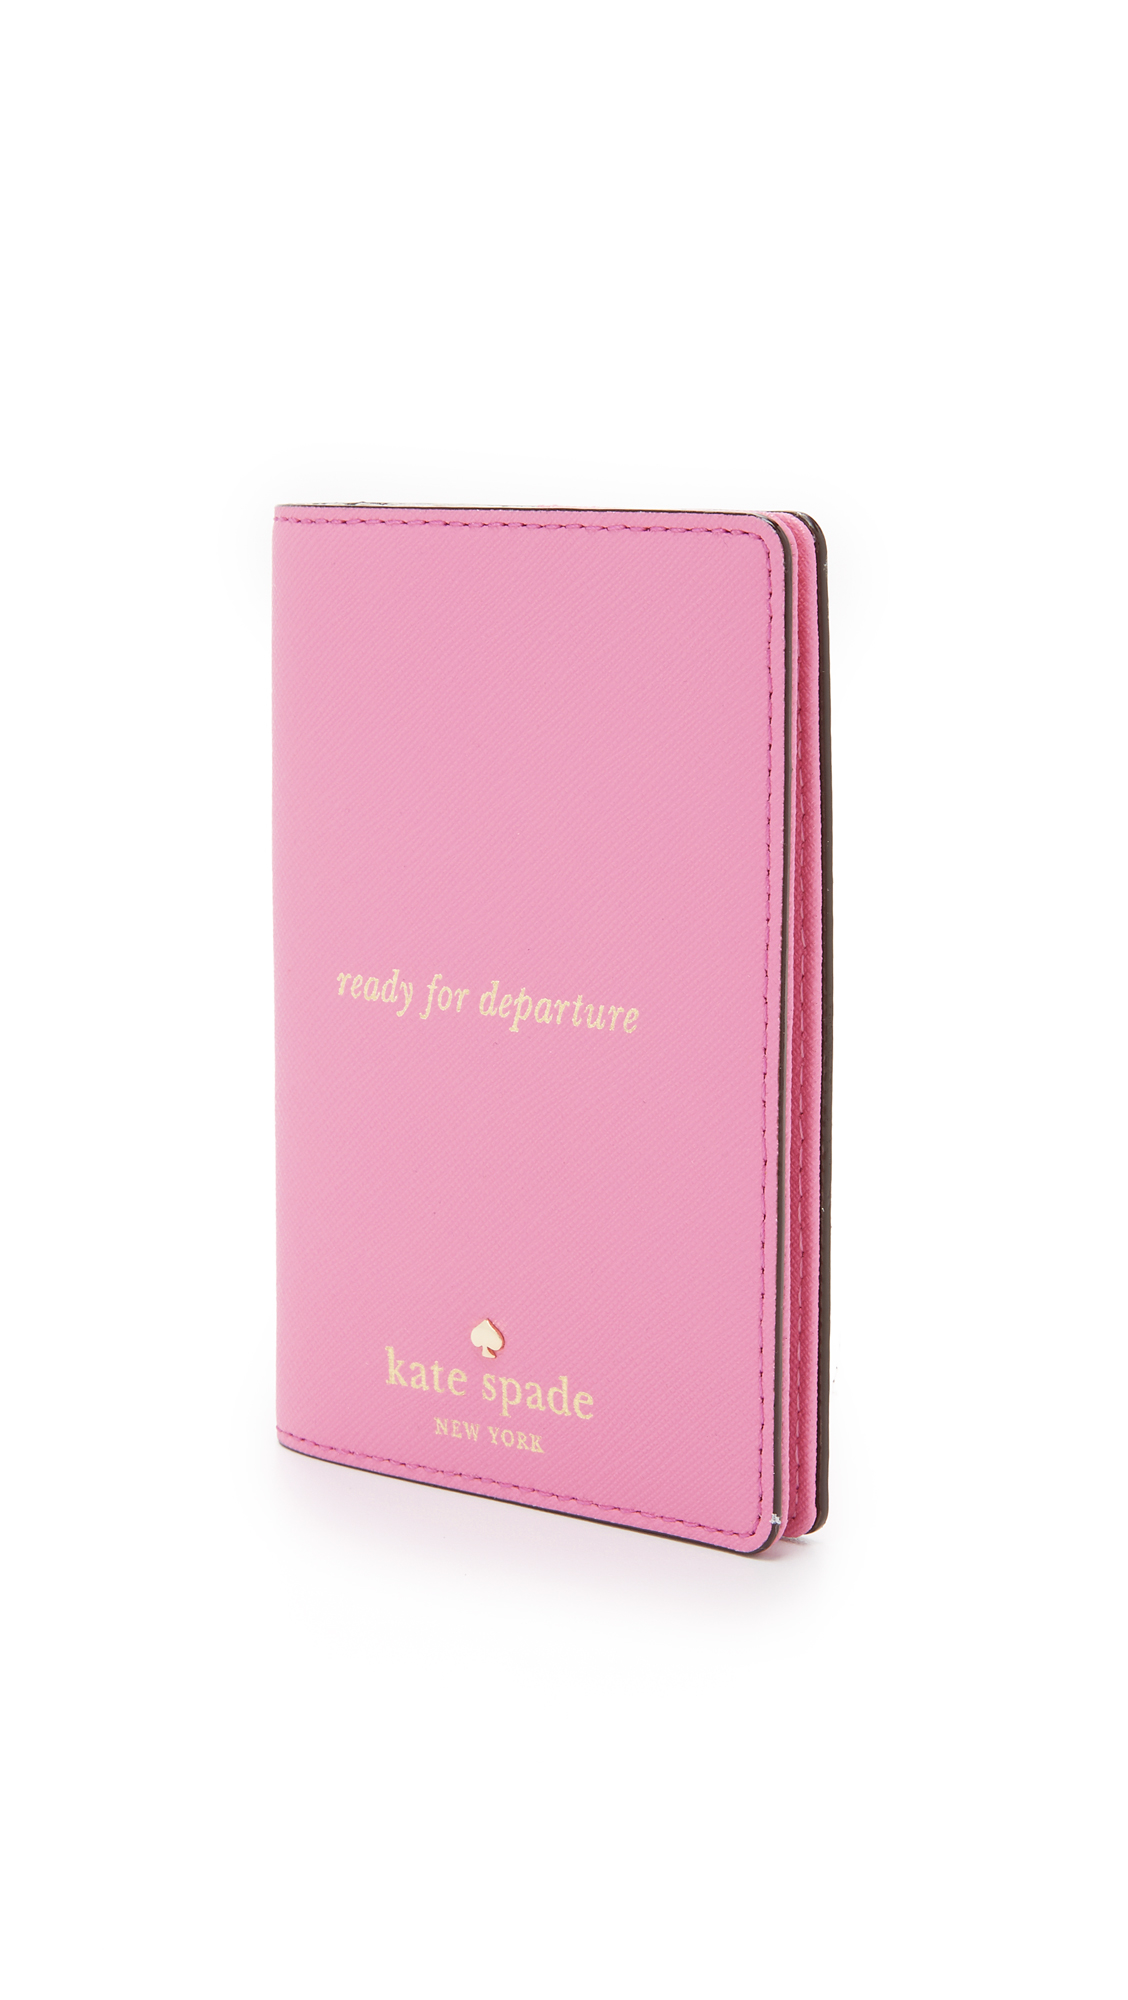 Pink Dior Passport Holder, Never Used for Sale in Seattle, WA